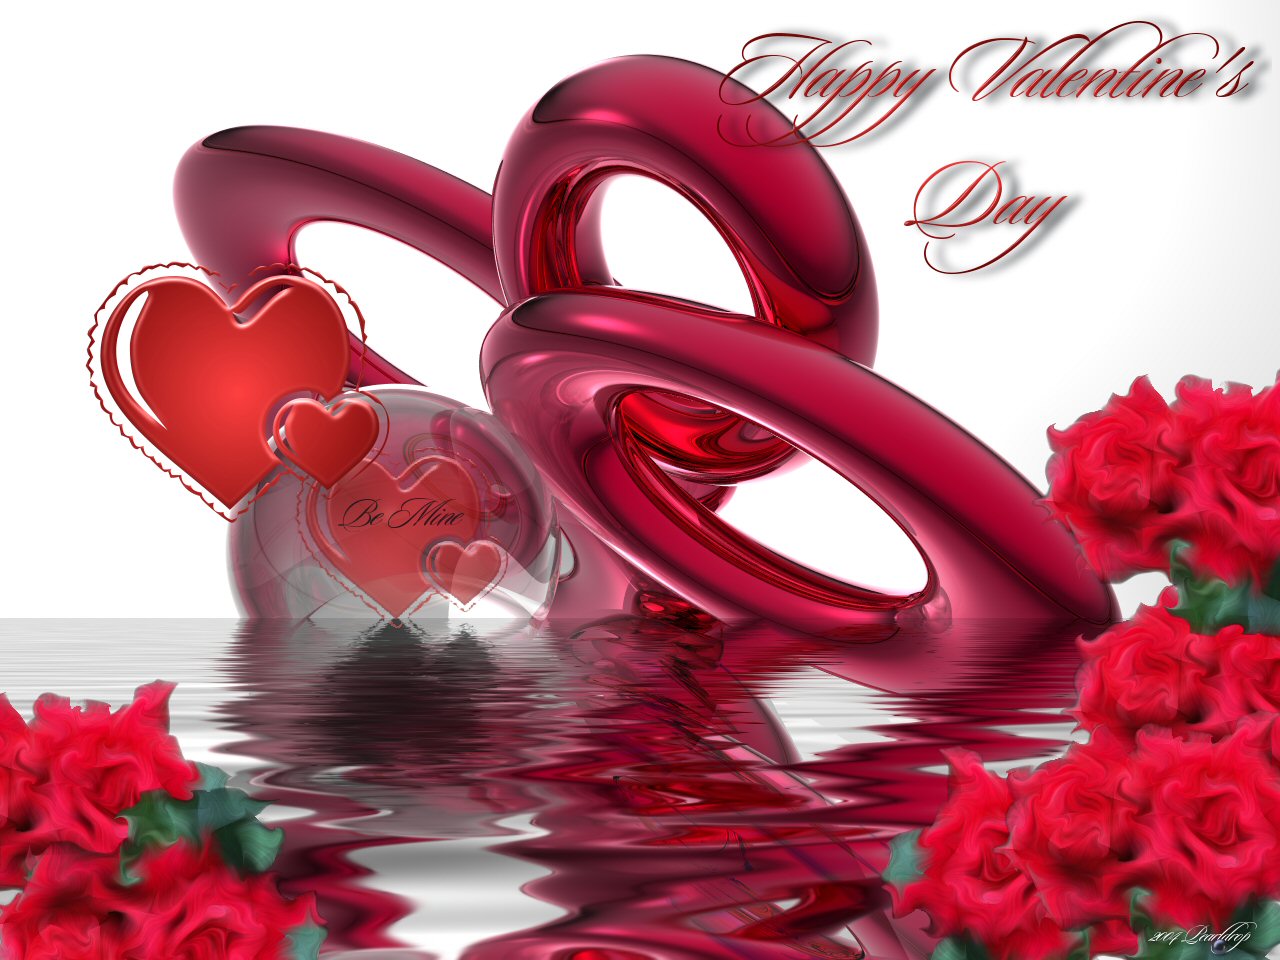 Happy Valentines Day HD Wallpaper Image Greetings